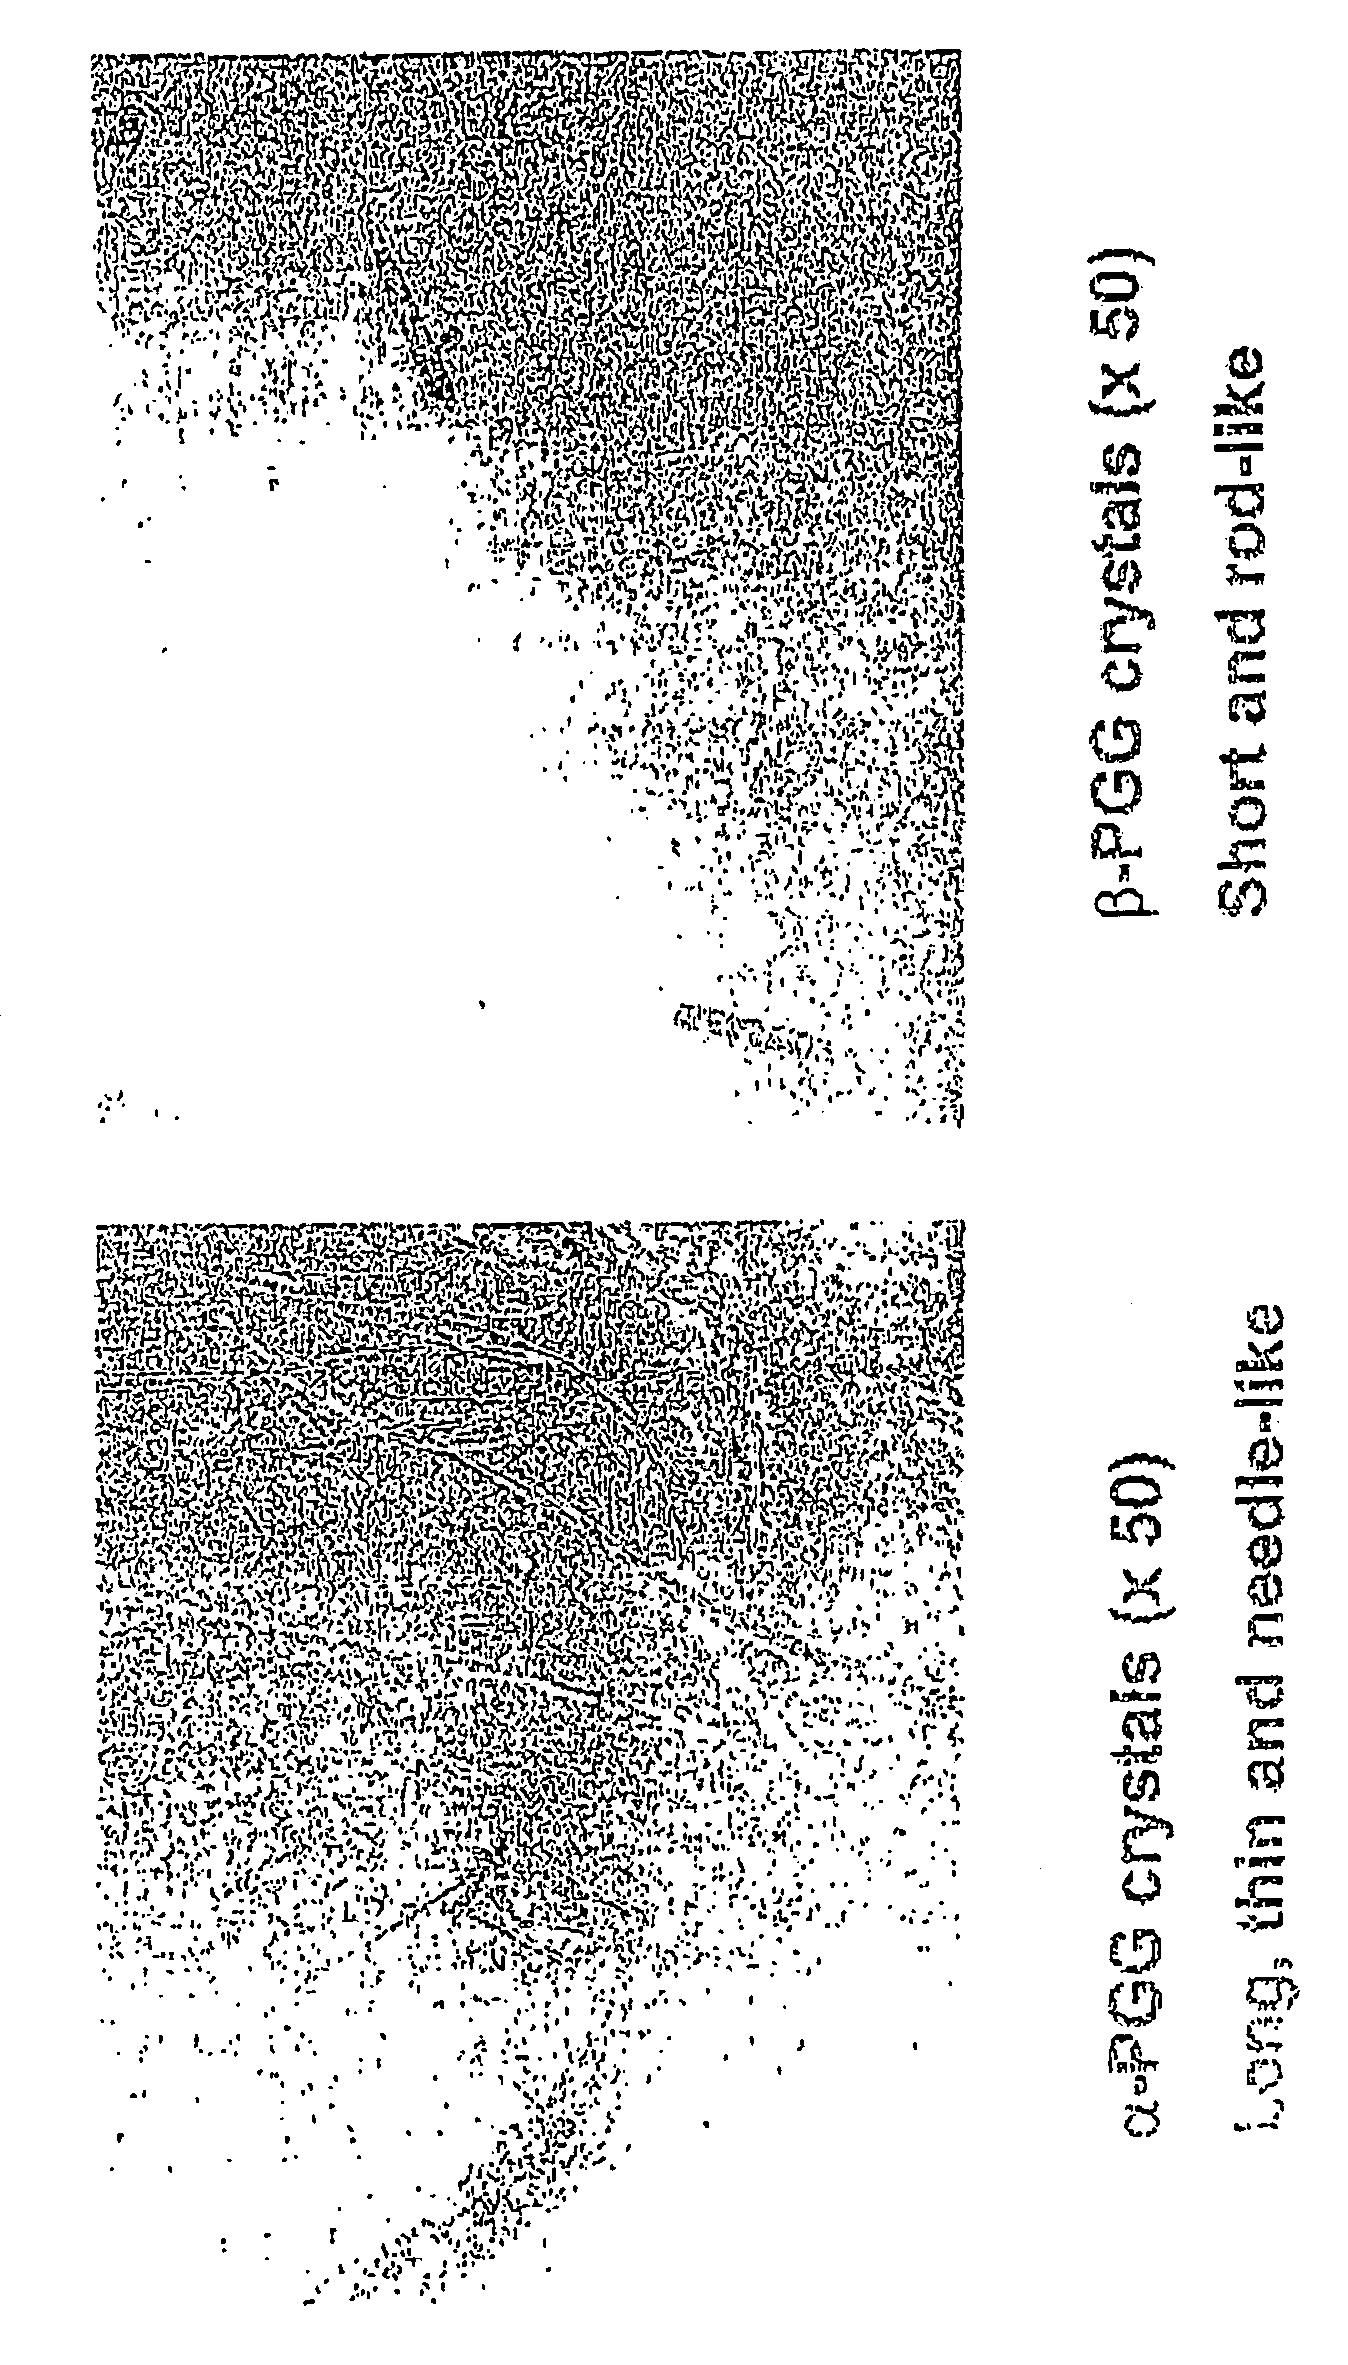 PGG separation and purification